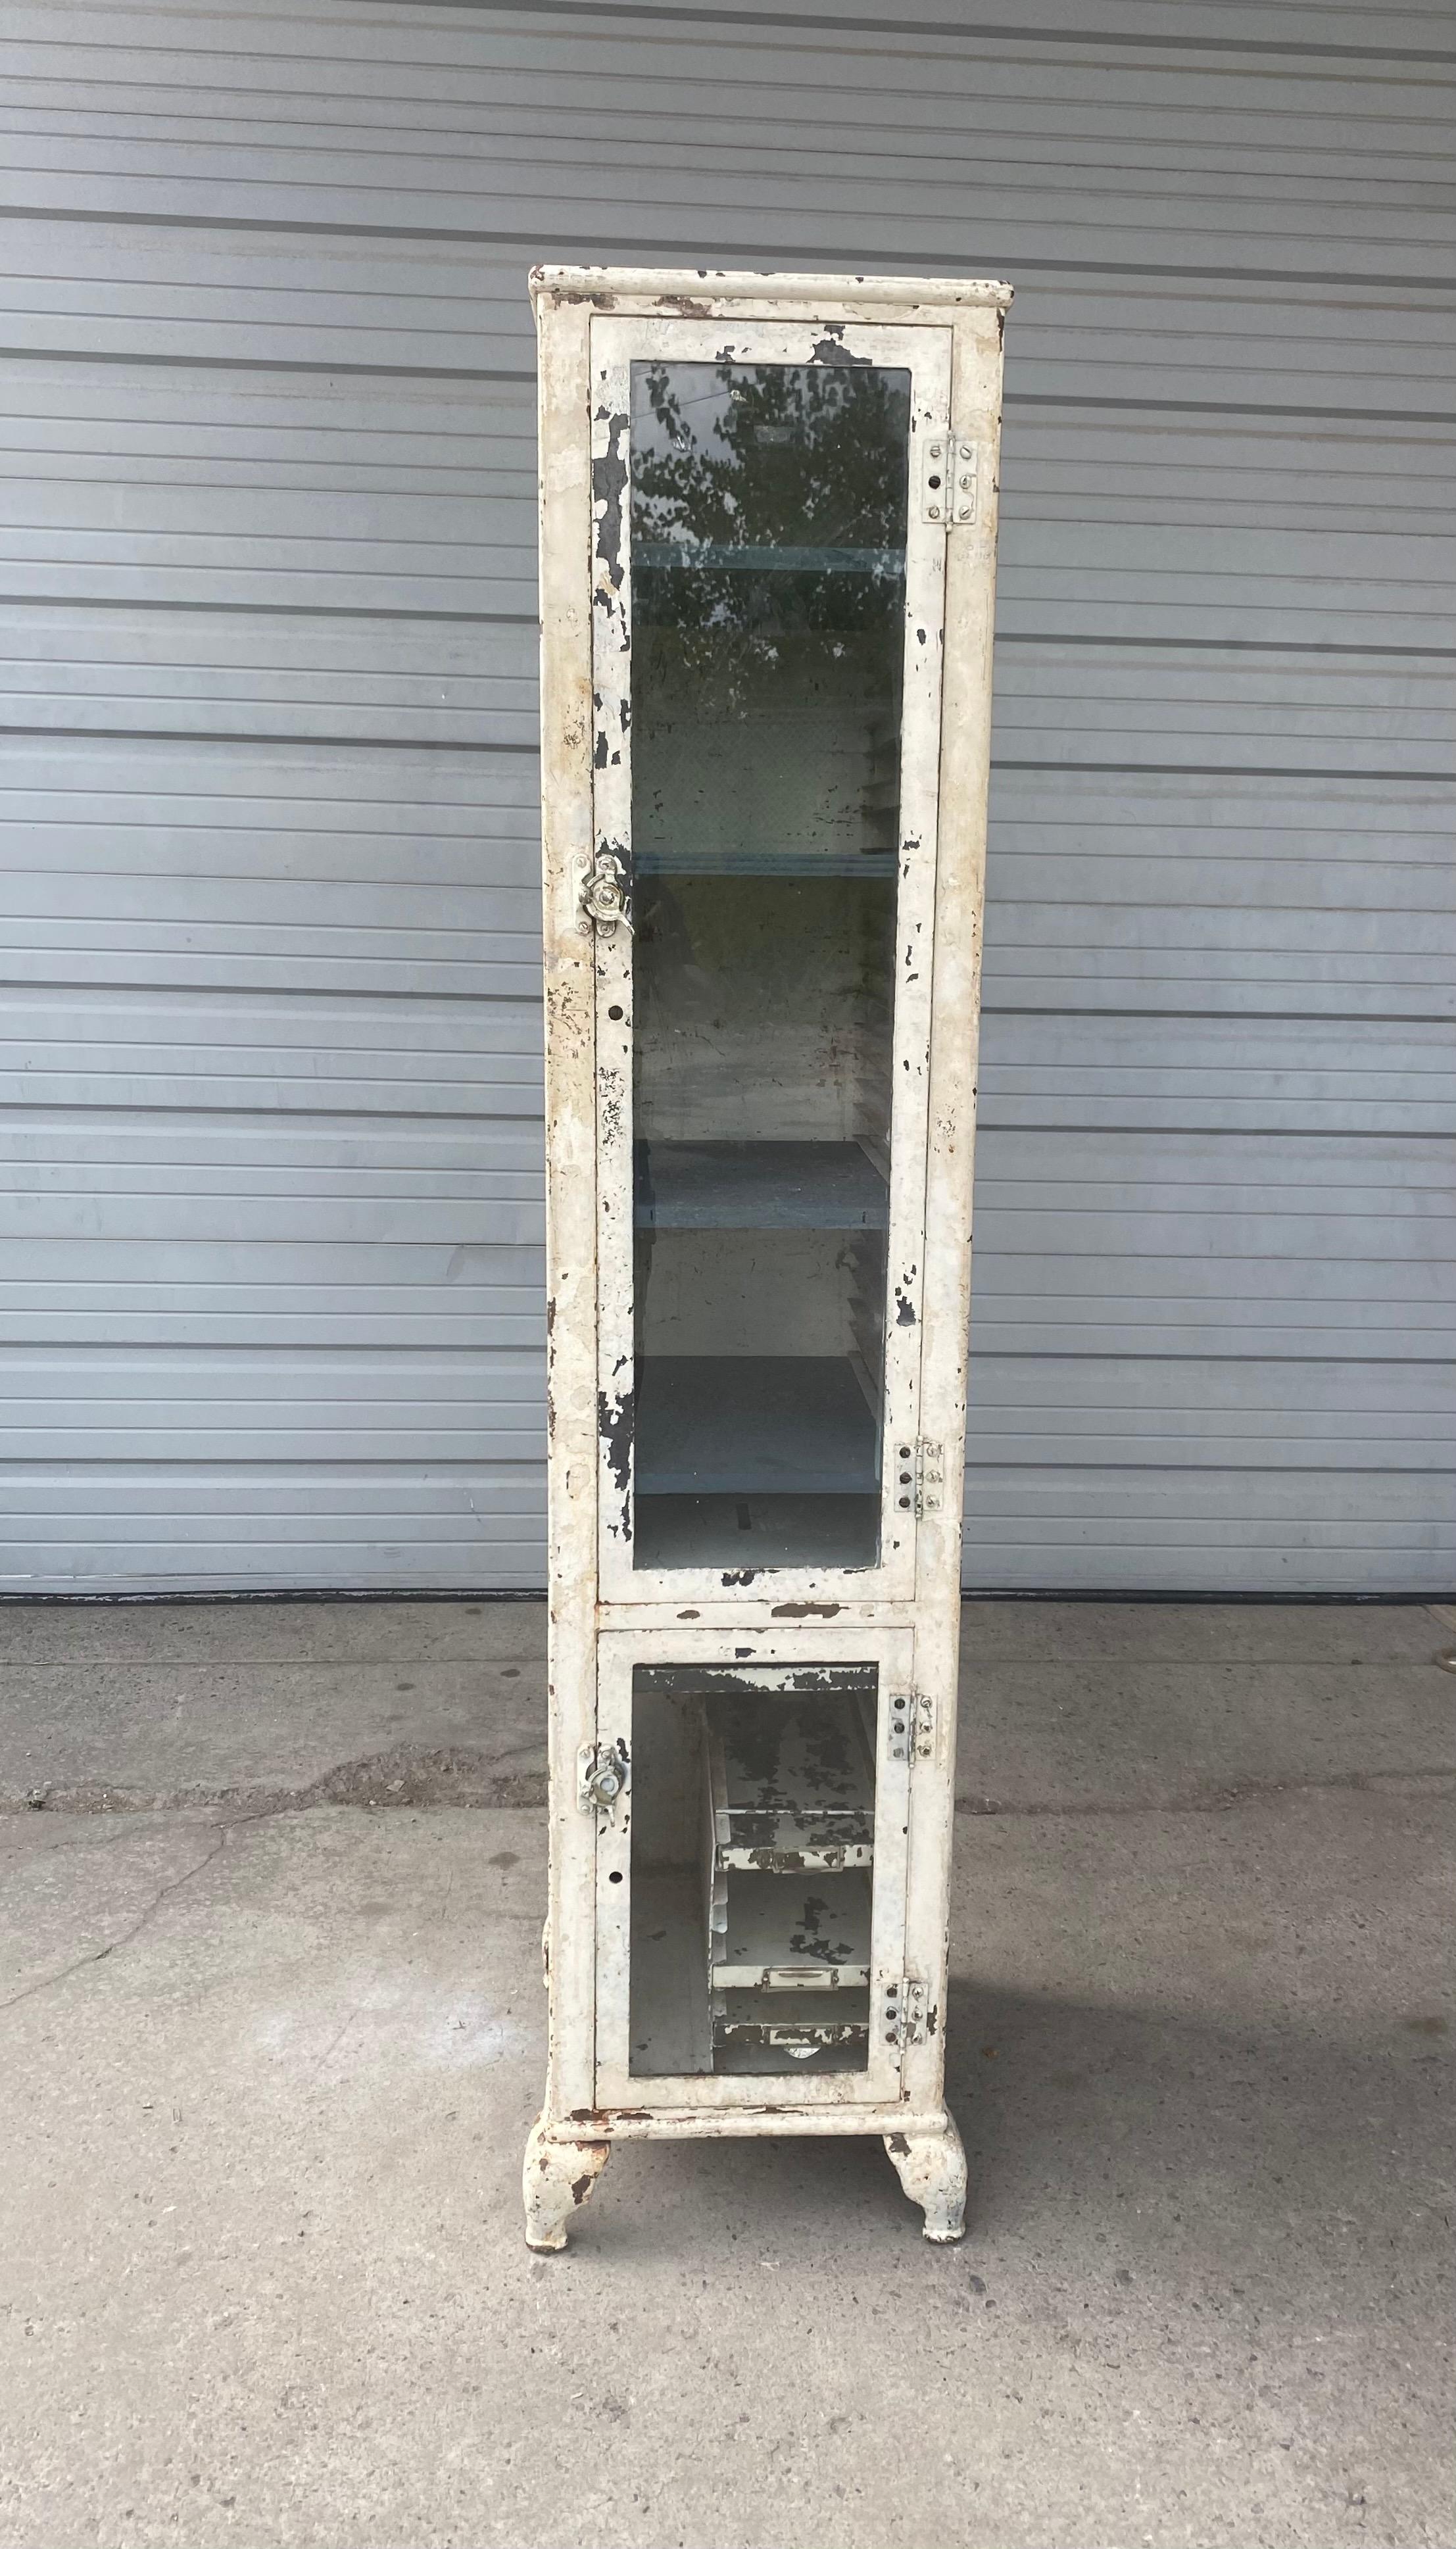 Unusual industrial medical / specimen cabinet, steel and glass. Great size, scale, proportion. Tall narrow metal cabinet, upper glass door with shelves, lower glass door will small pull out drawers. Retains original white paint, as well as turning